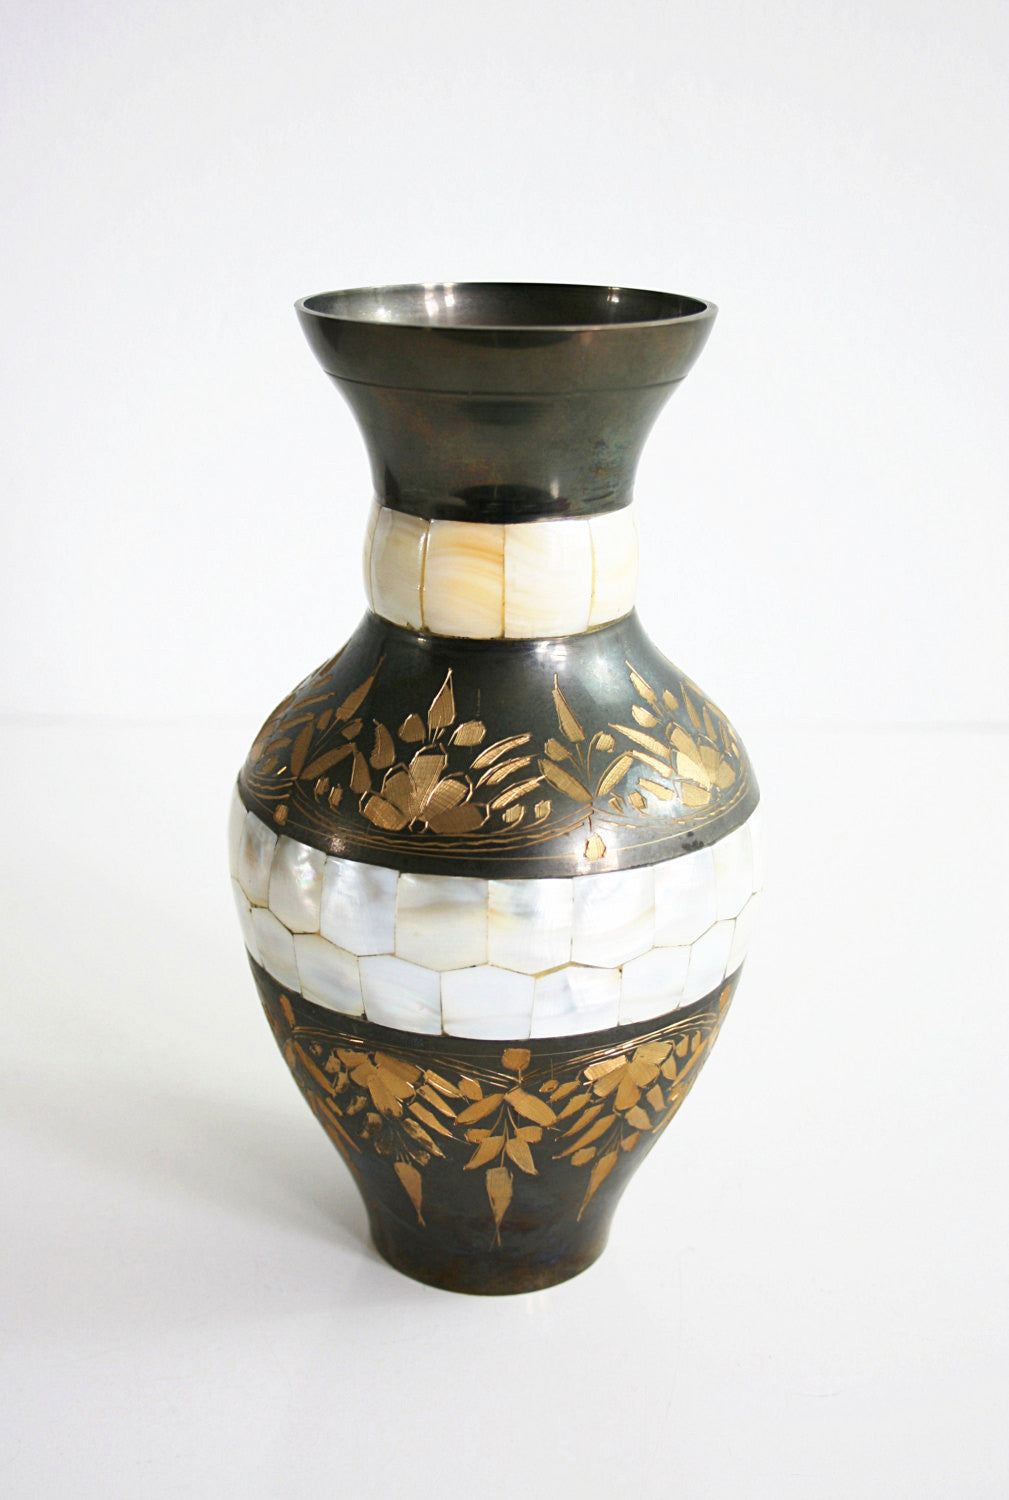 SOLD - Vintage Etched India Brass Gold & Black Enameled Vase with Mother of Pearl Inlay